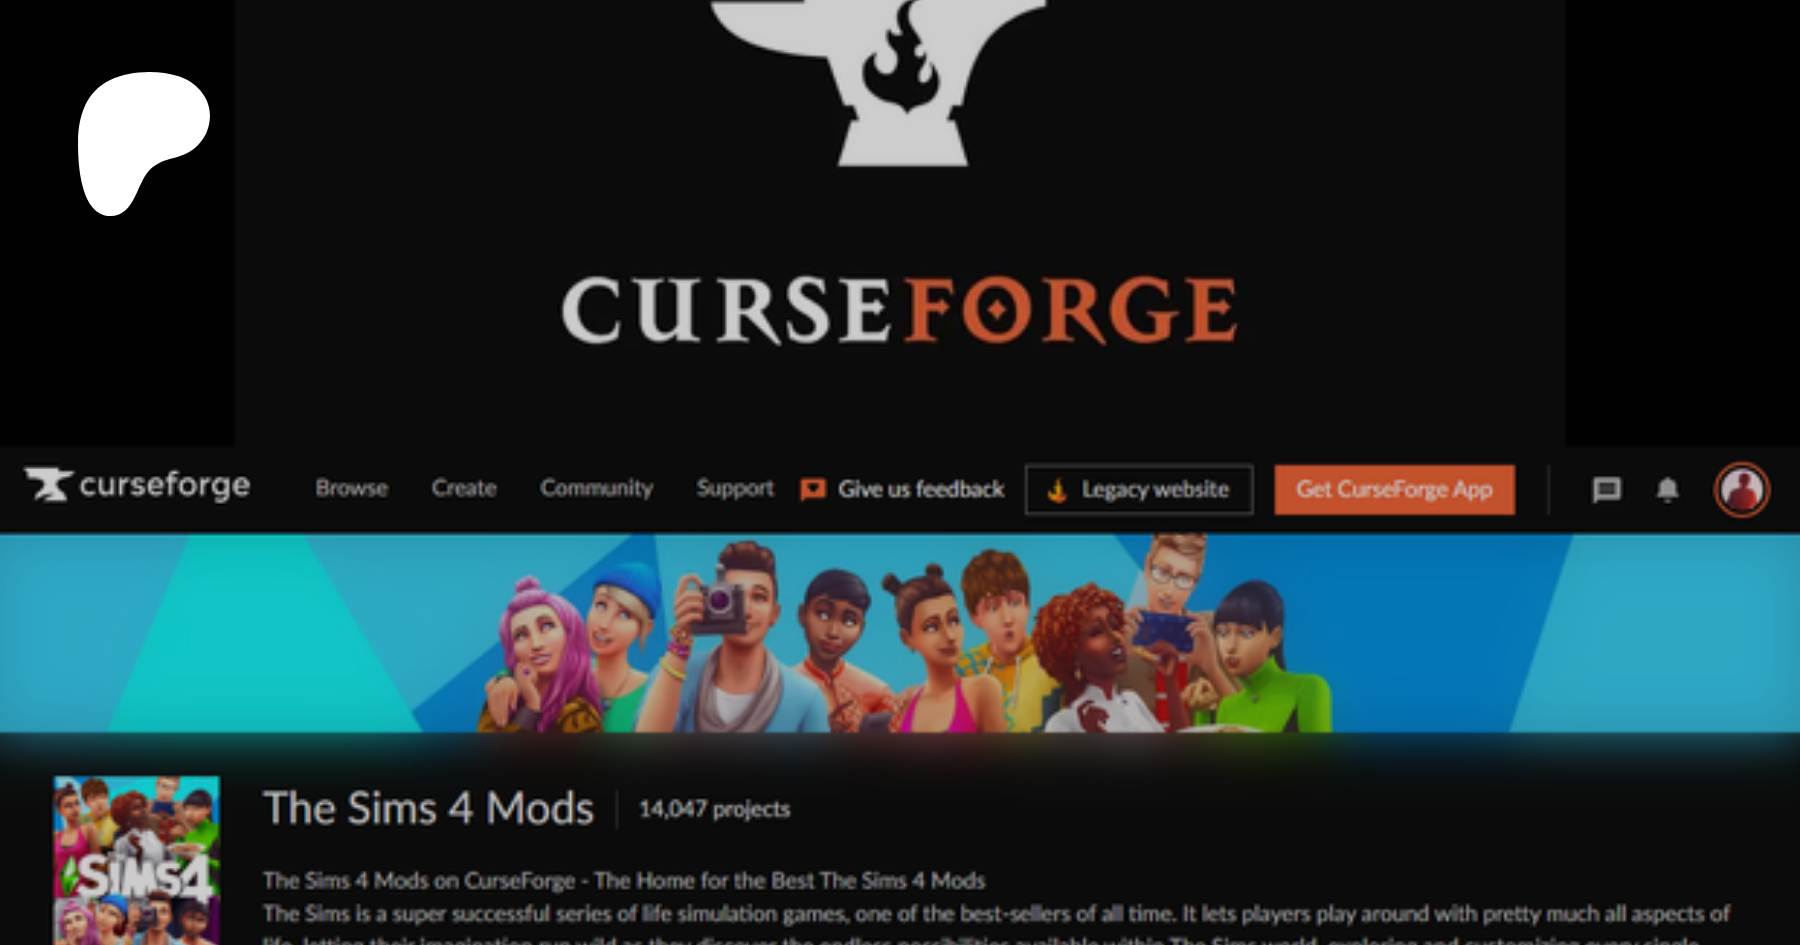 How to Get Your CurseForge Logs: CurseForge support